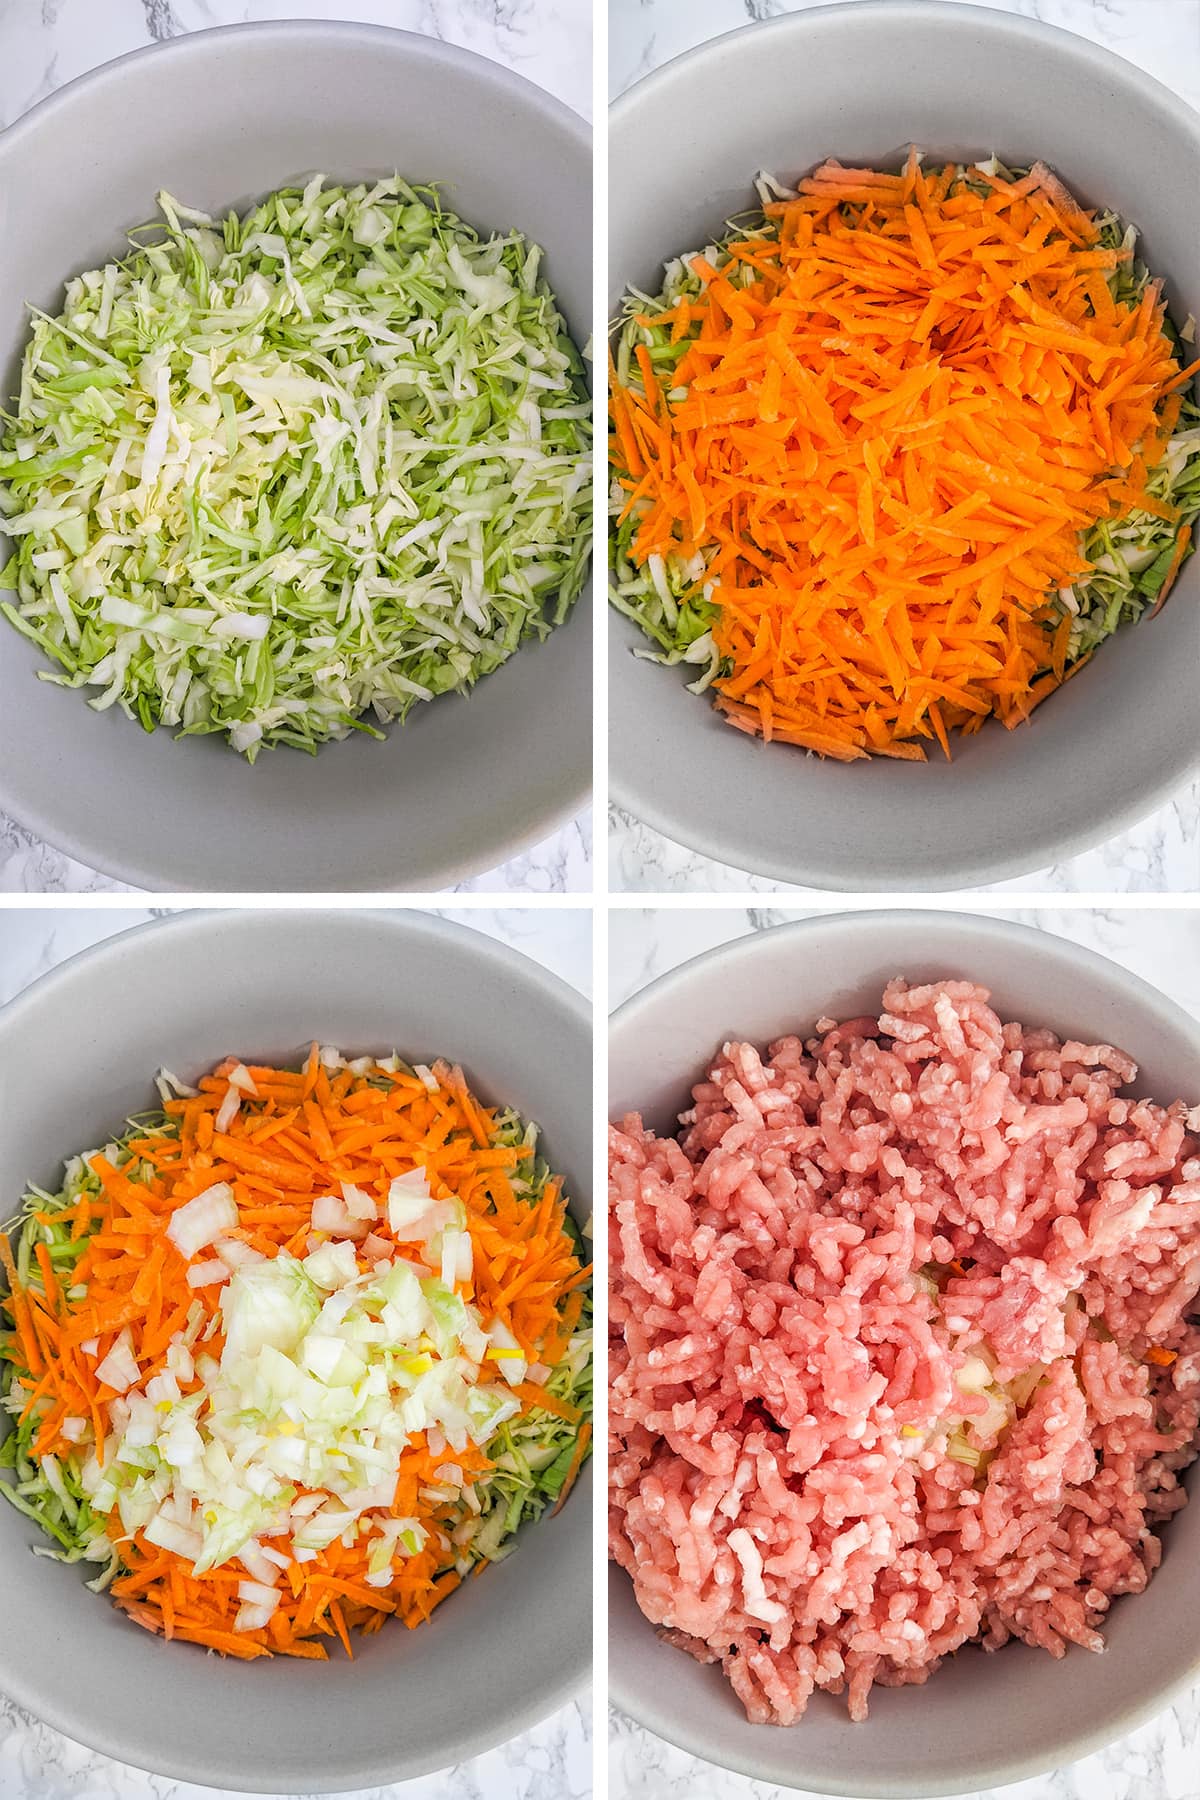 Collage of mixing different ingredients for cabbage pudding casserole.